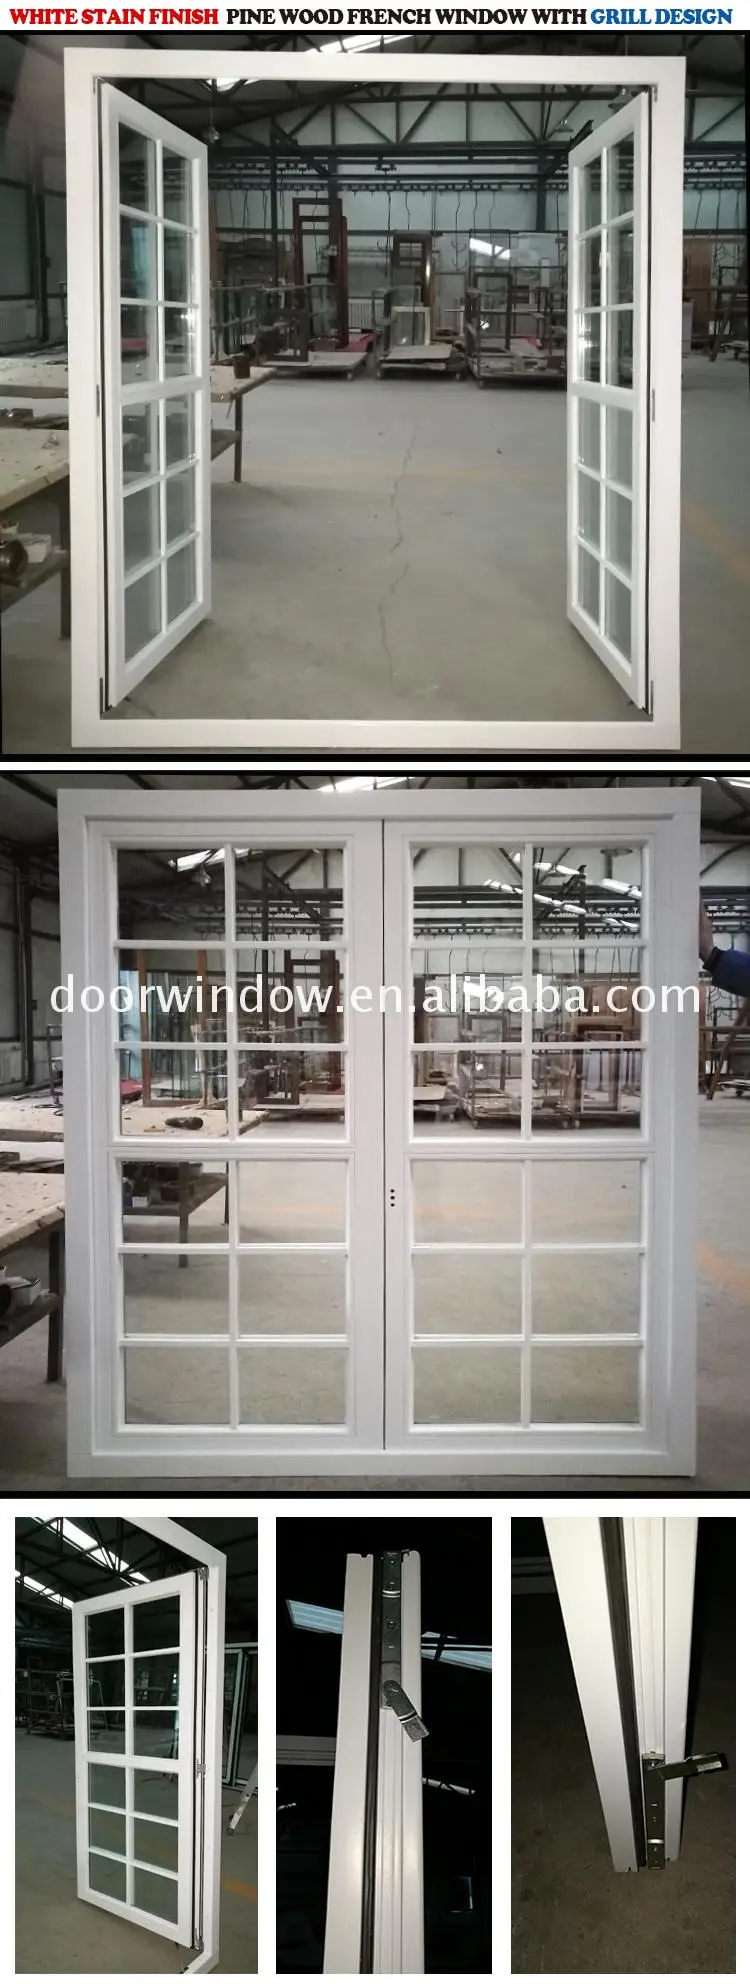 ventilation french window with grille design